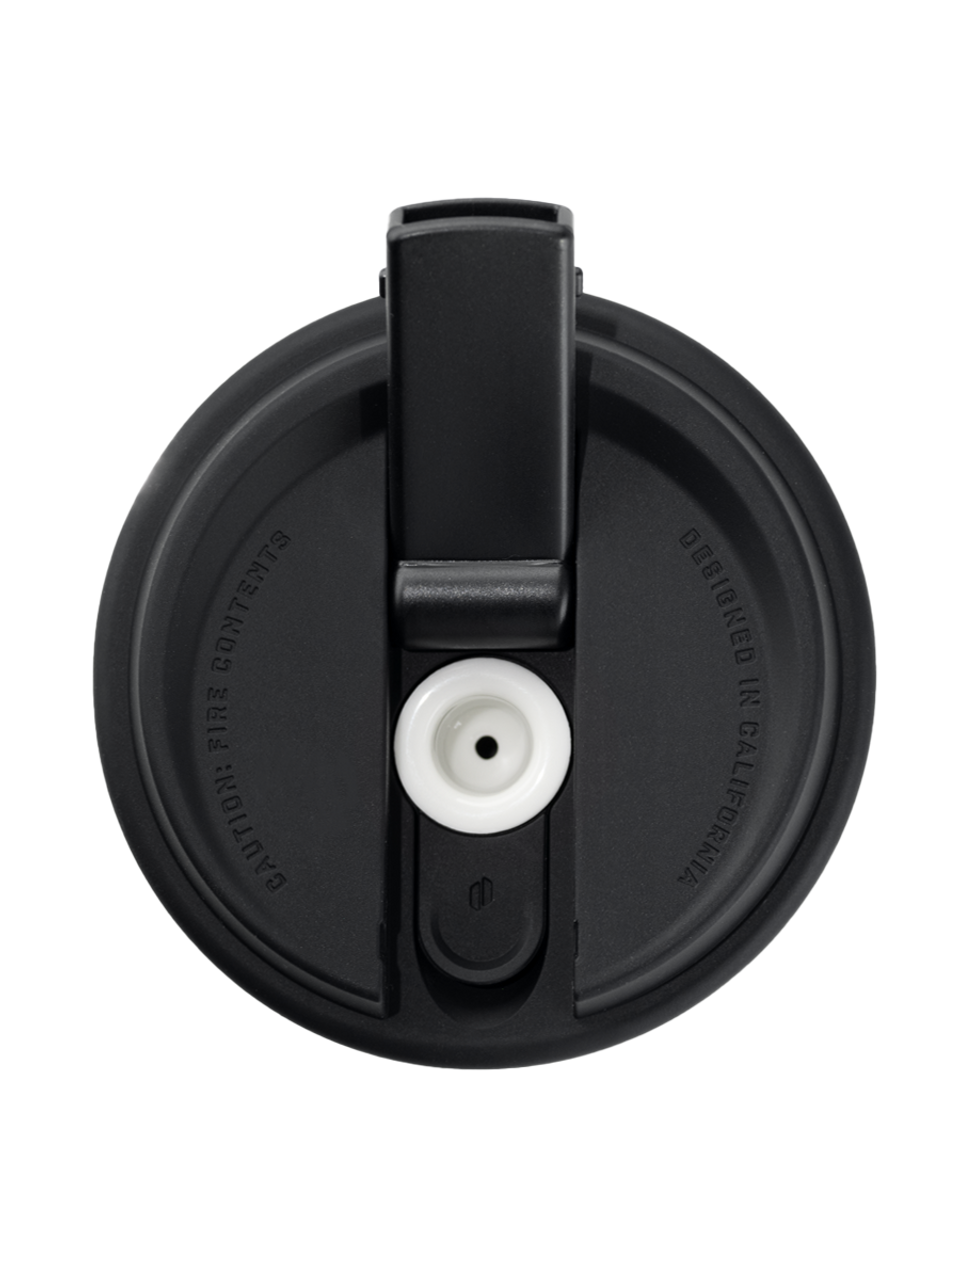 Puffco Cupsy coffee cup water pipe in black, top view, showing lid and bowl